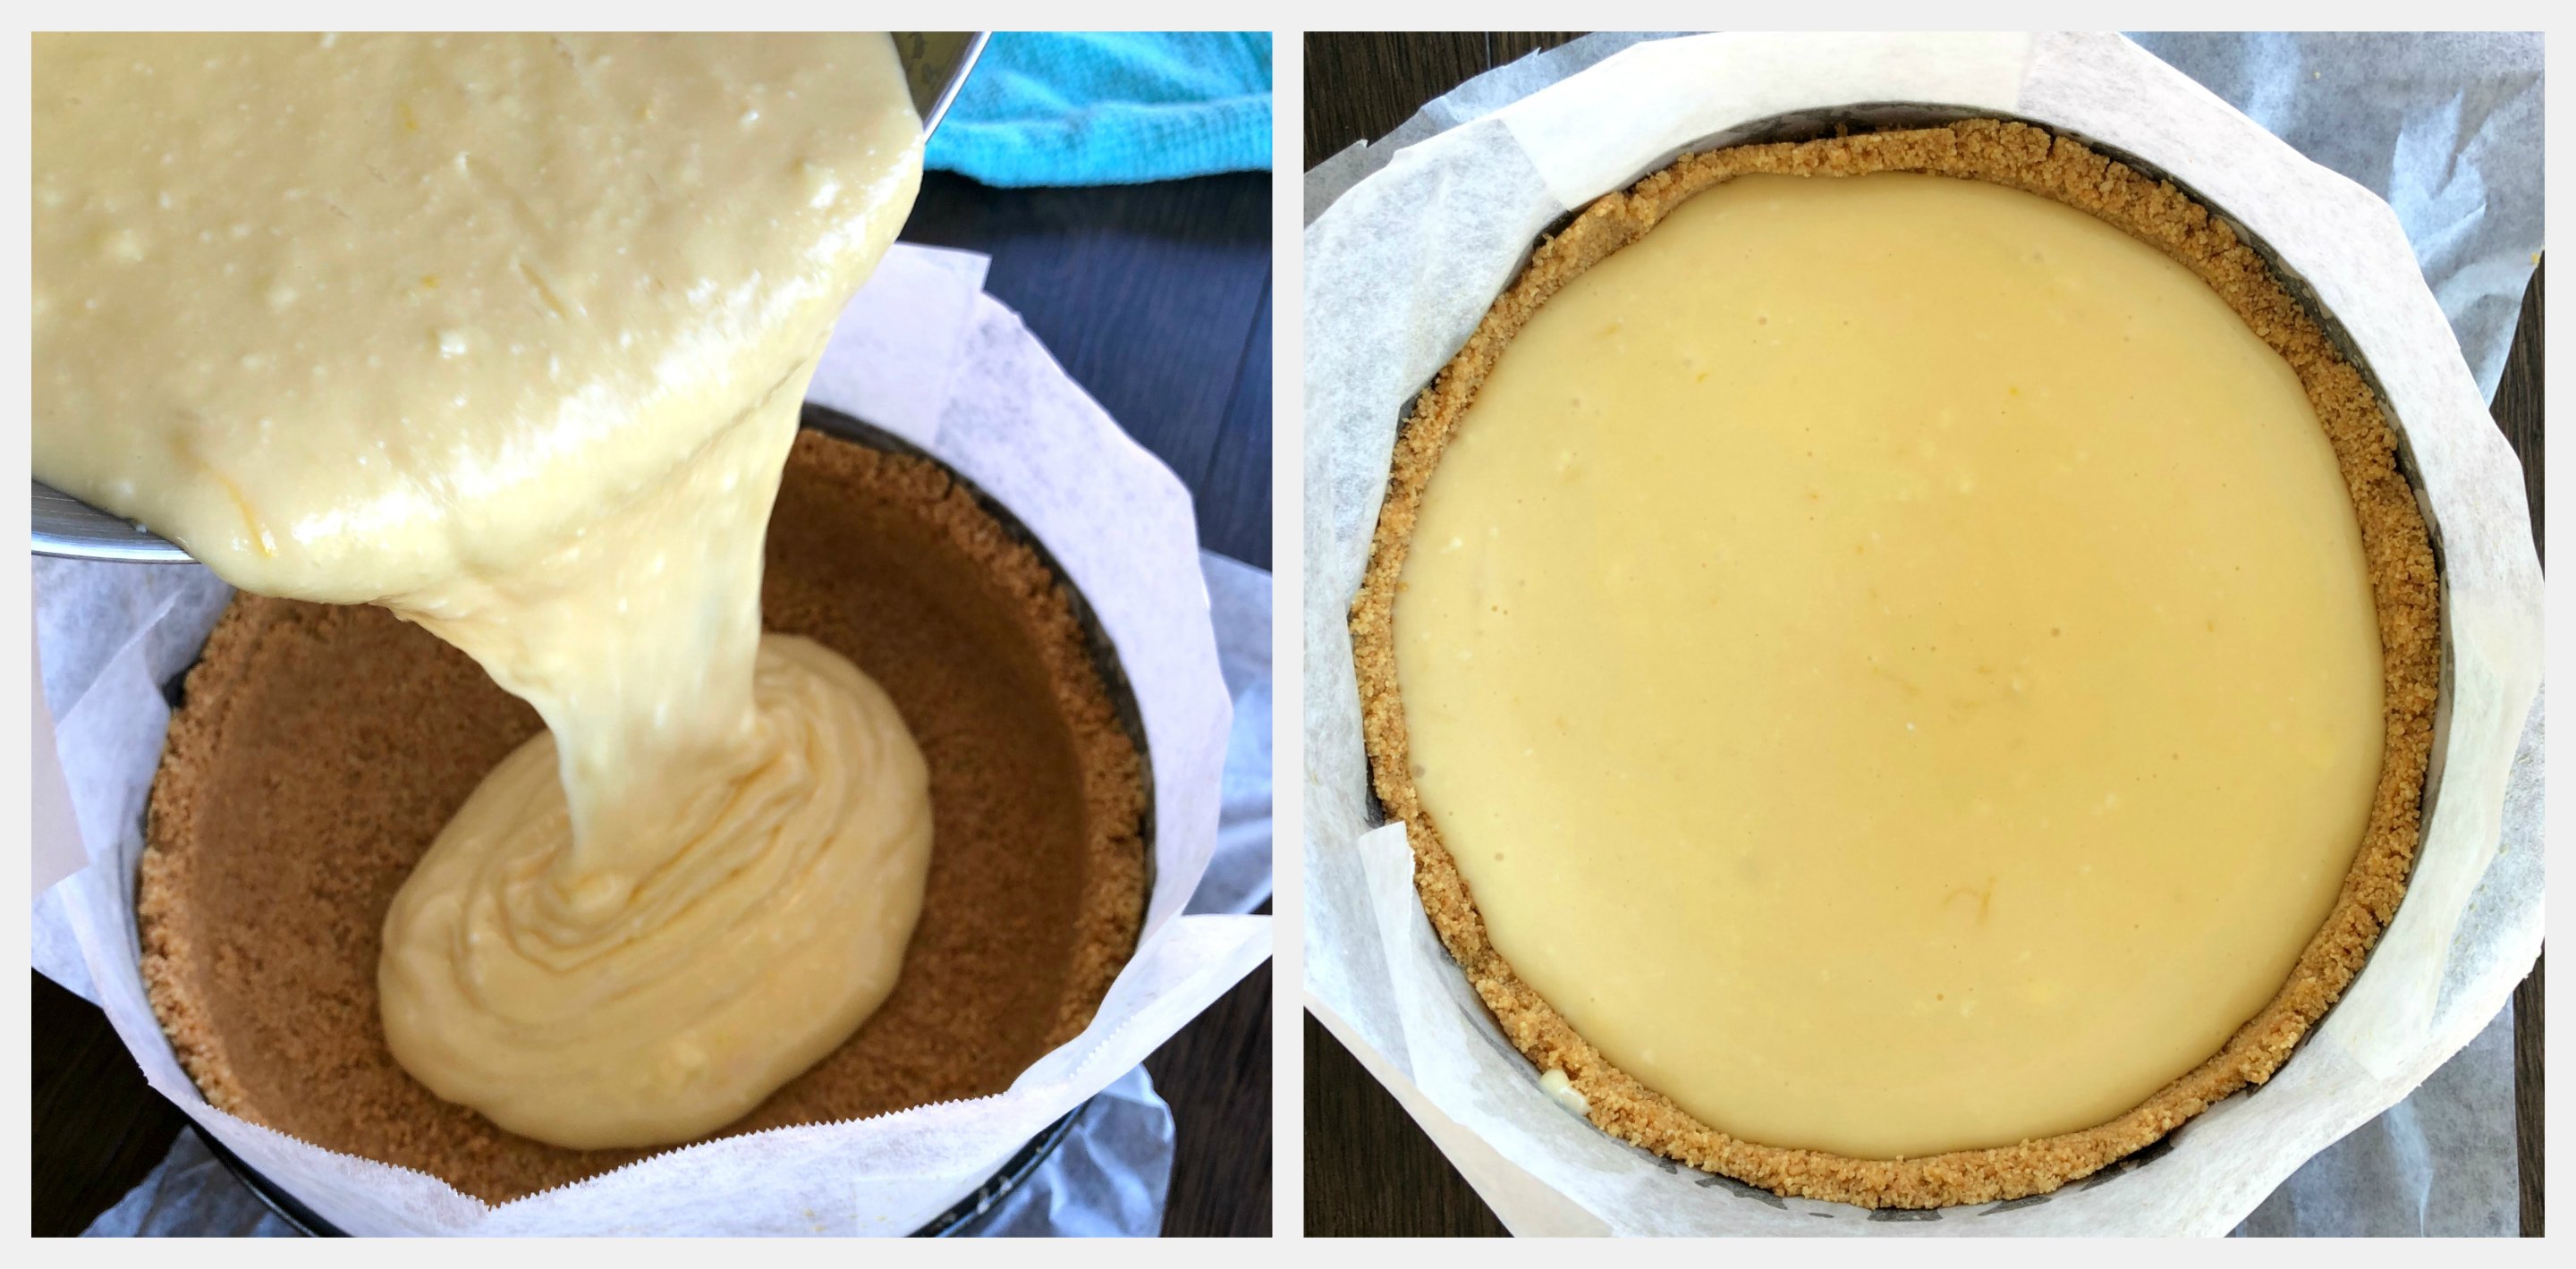 Preparing the filling for a baked cheesecake